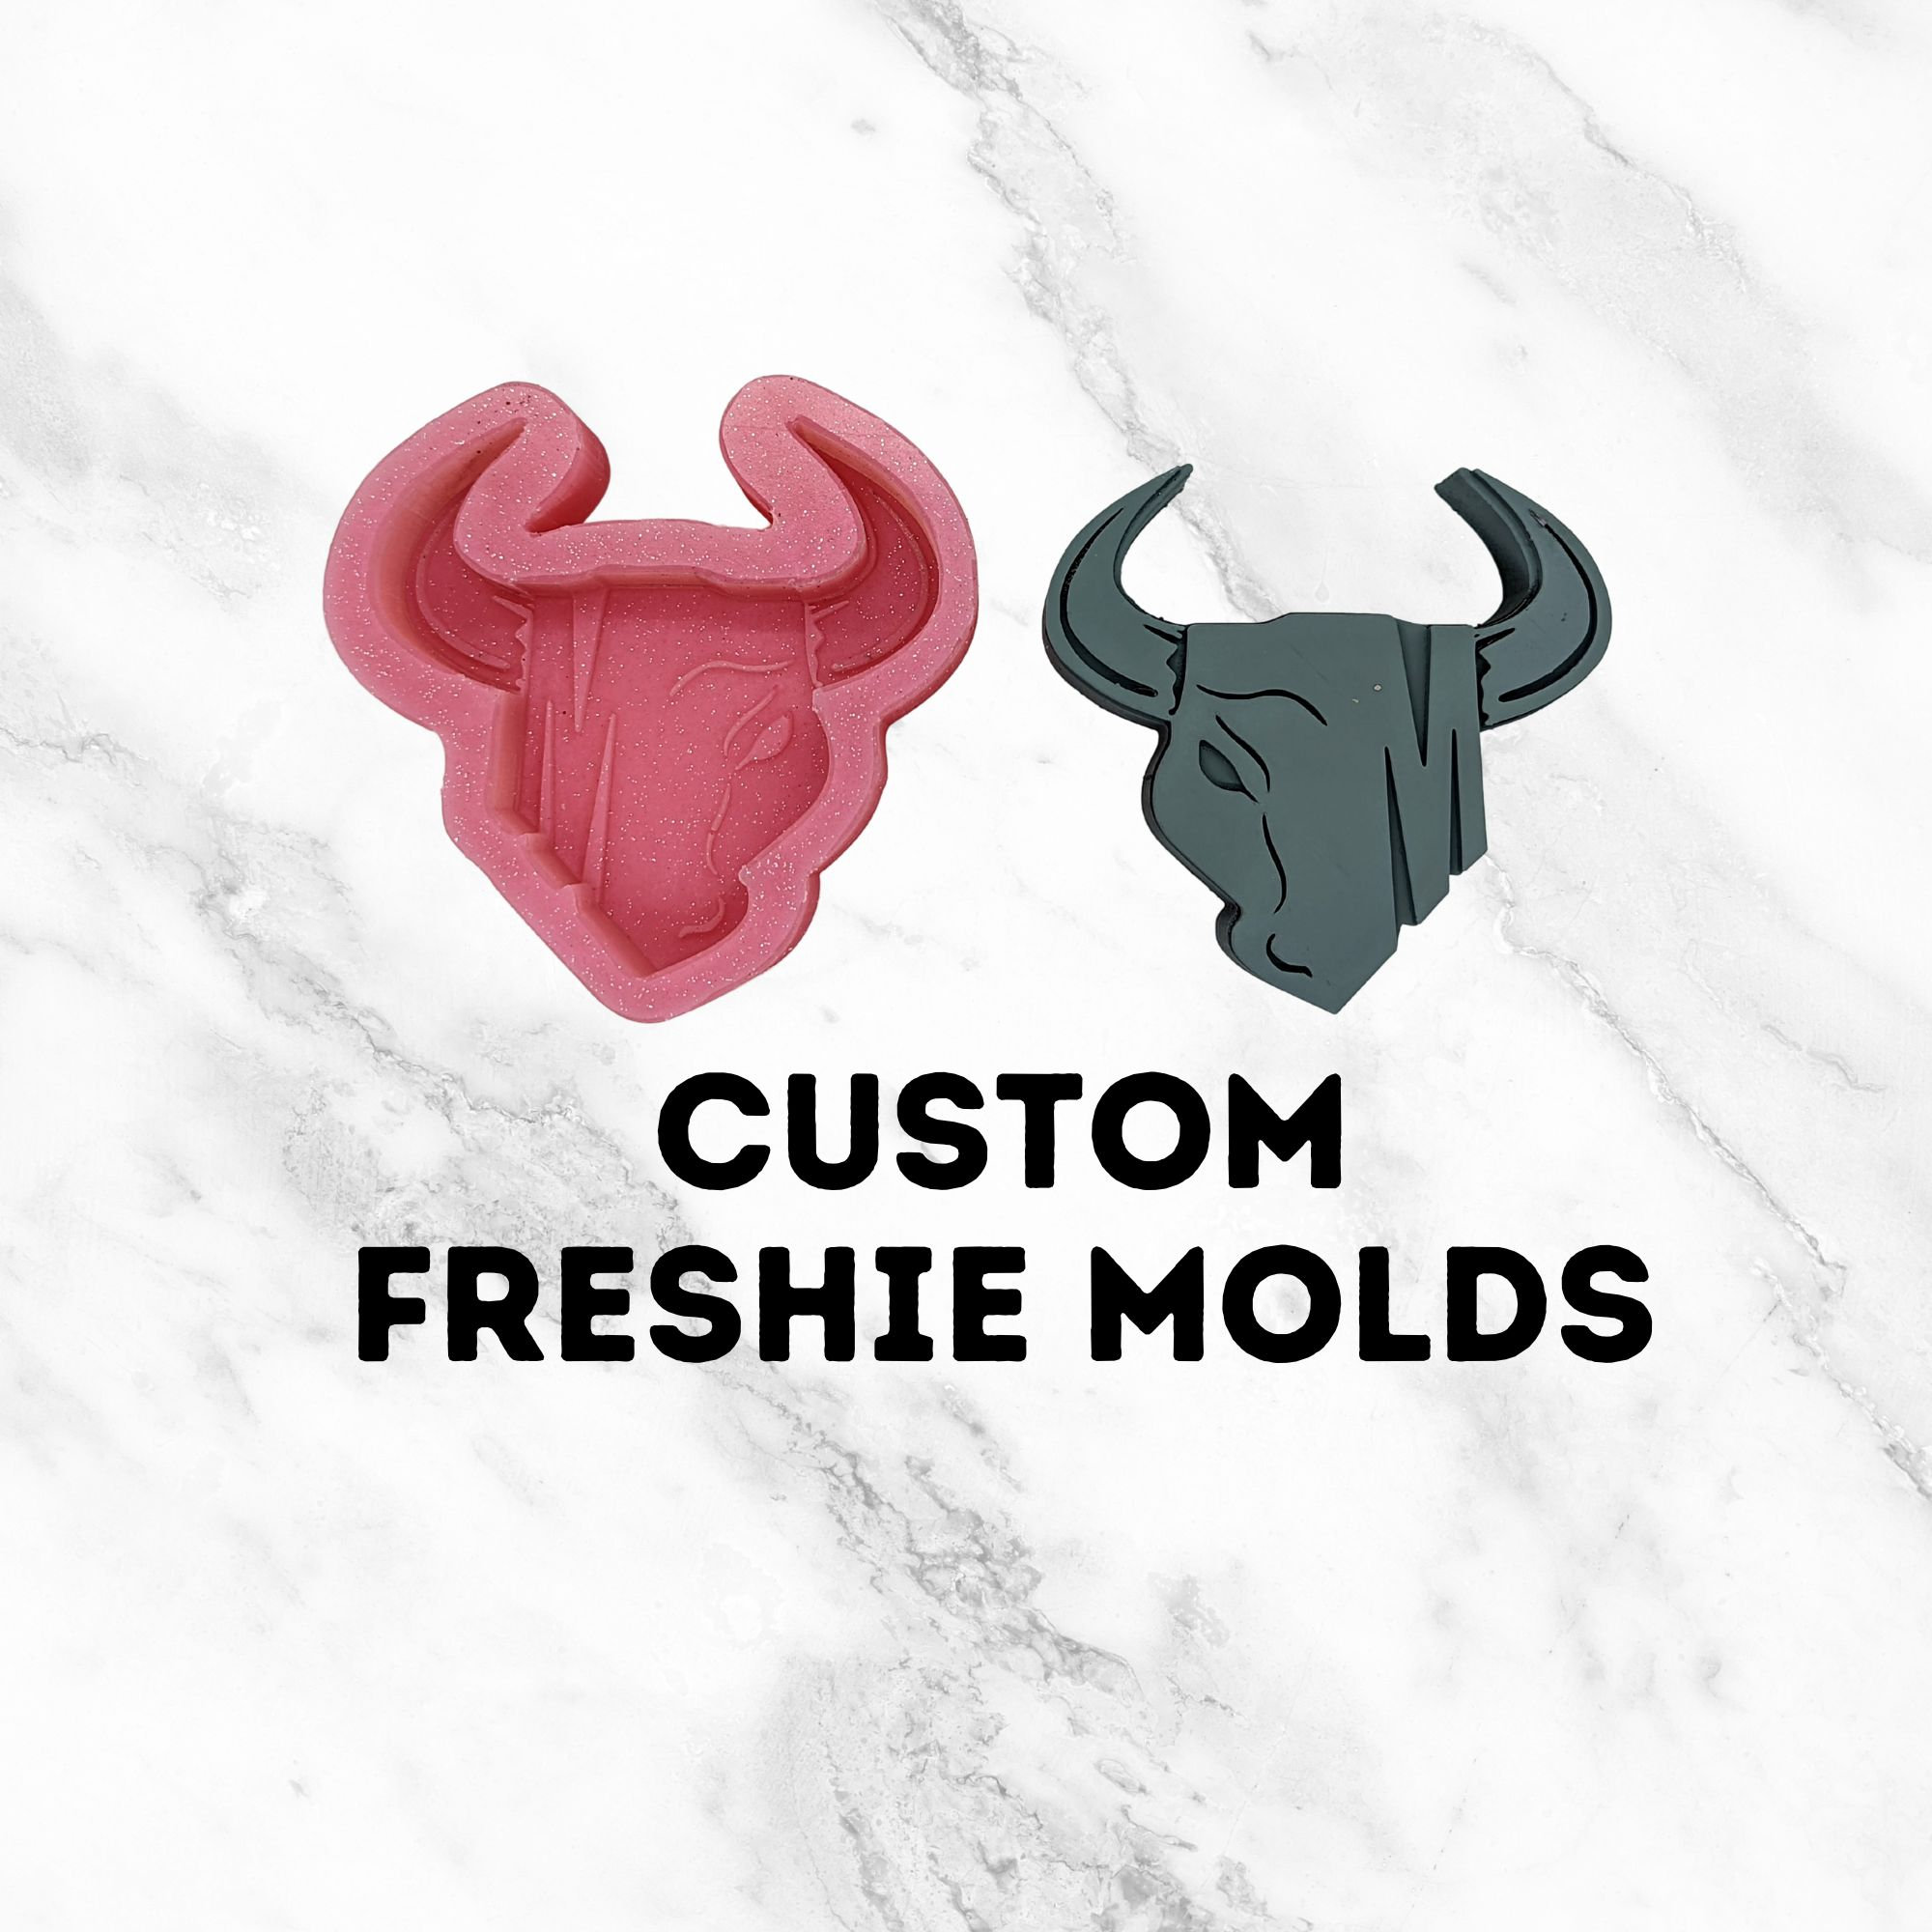 What Makes Custom Silicone Moulds Great for Seasonal Promotions?